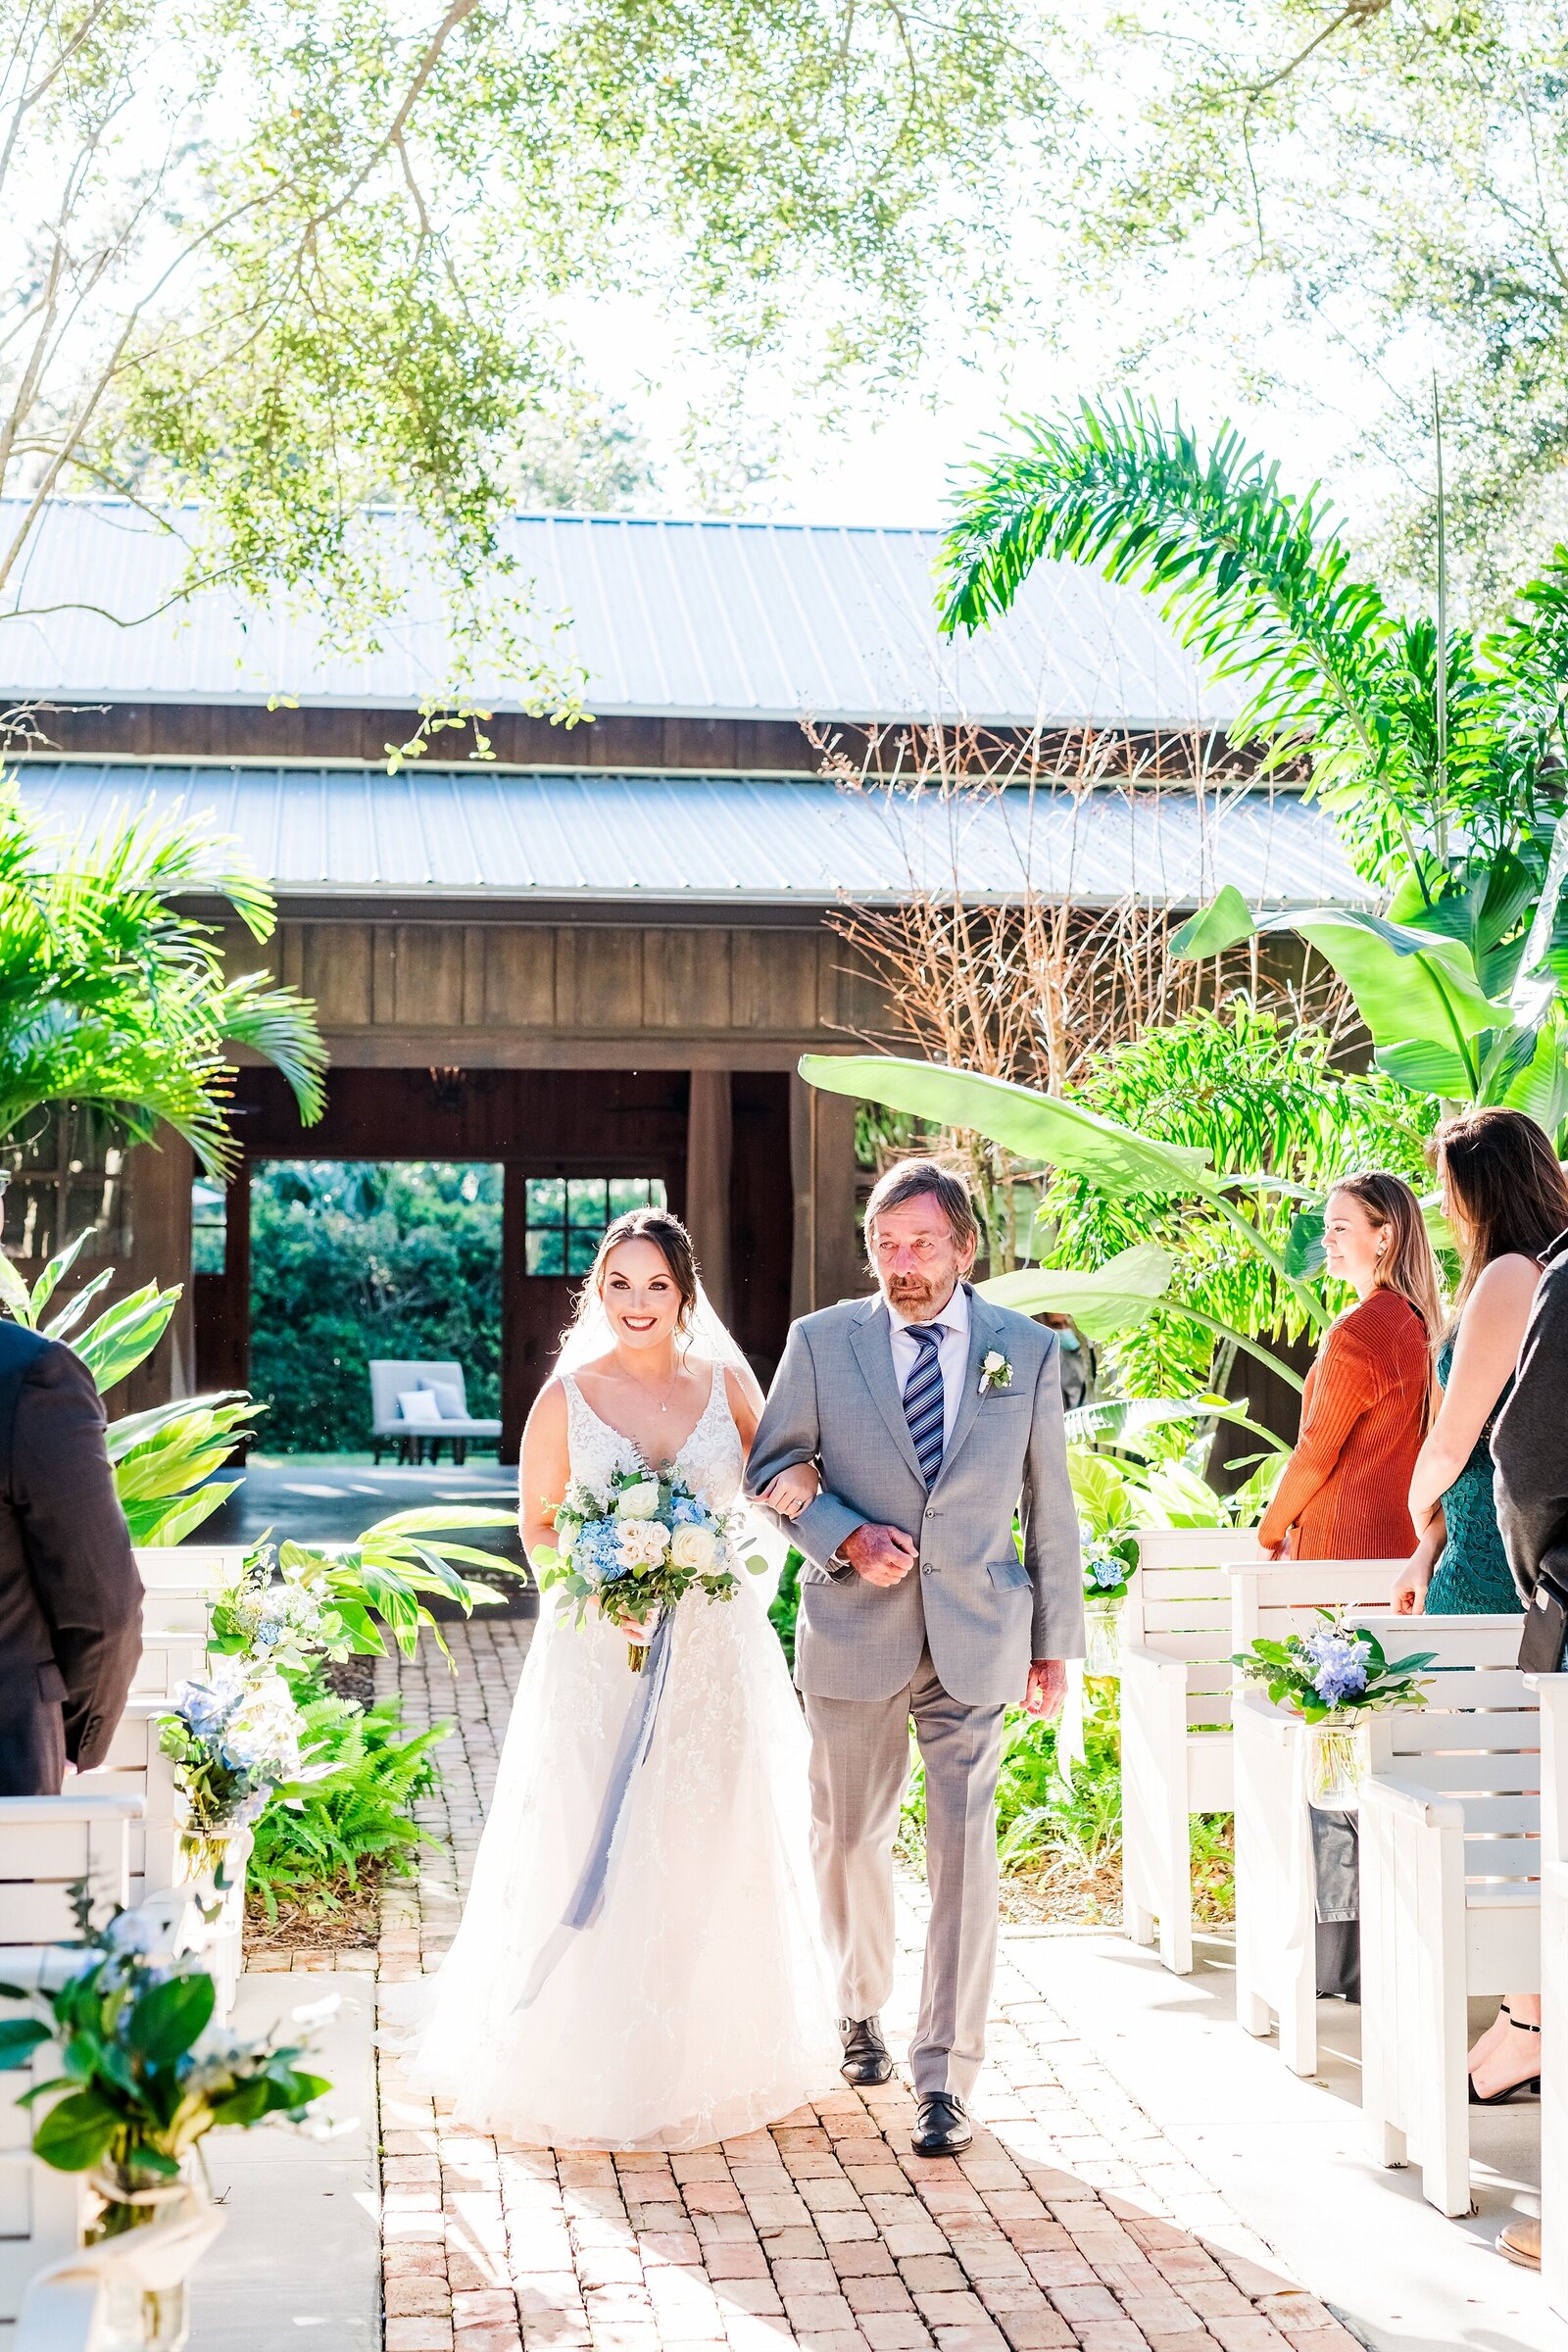 Dad walking daughter down aisle | The Delamater House Wedding | Chynna Pacheco Photography-501